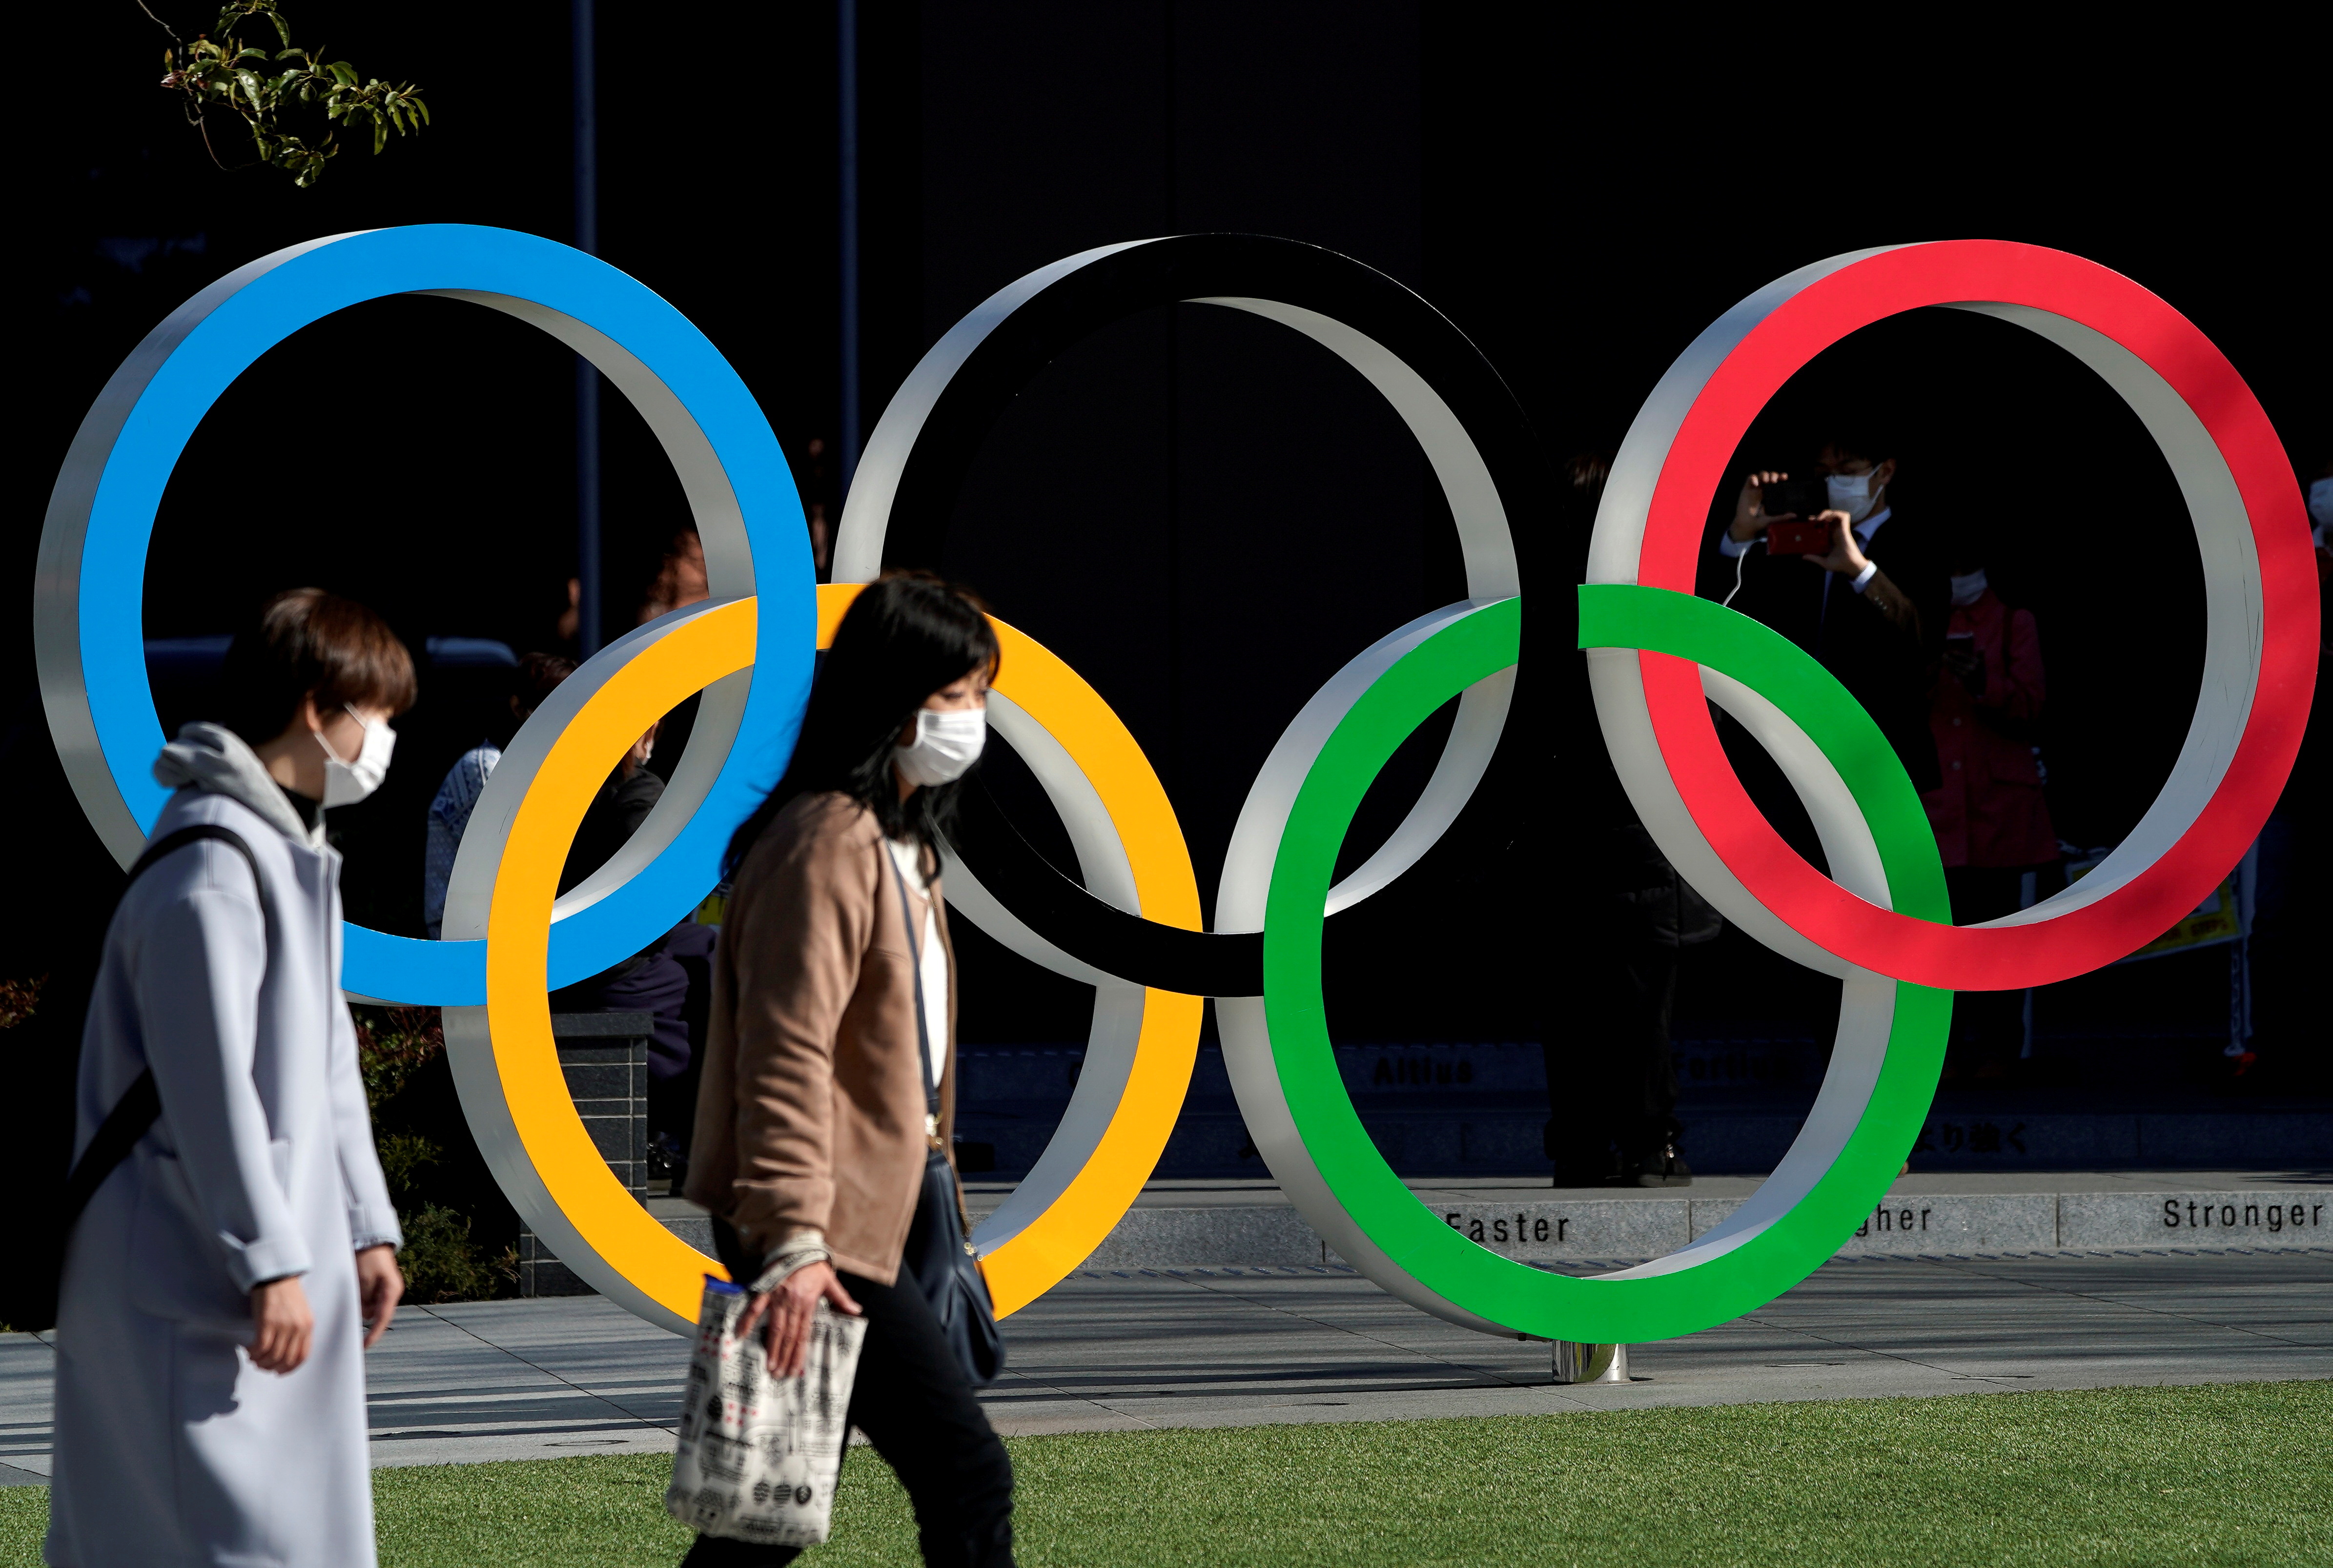 Women wearing protective face masks following an outbreak of the coronavirus disease walk past the Olympic rings in Tokyo